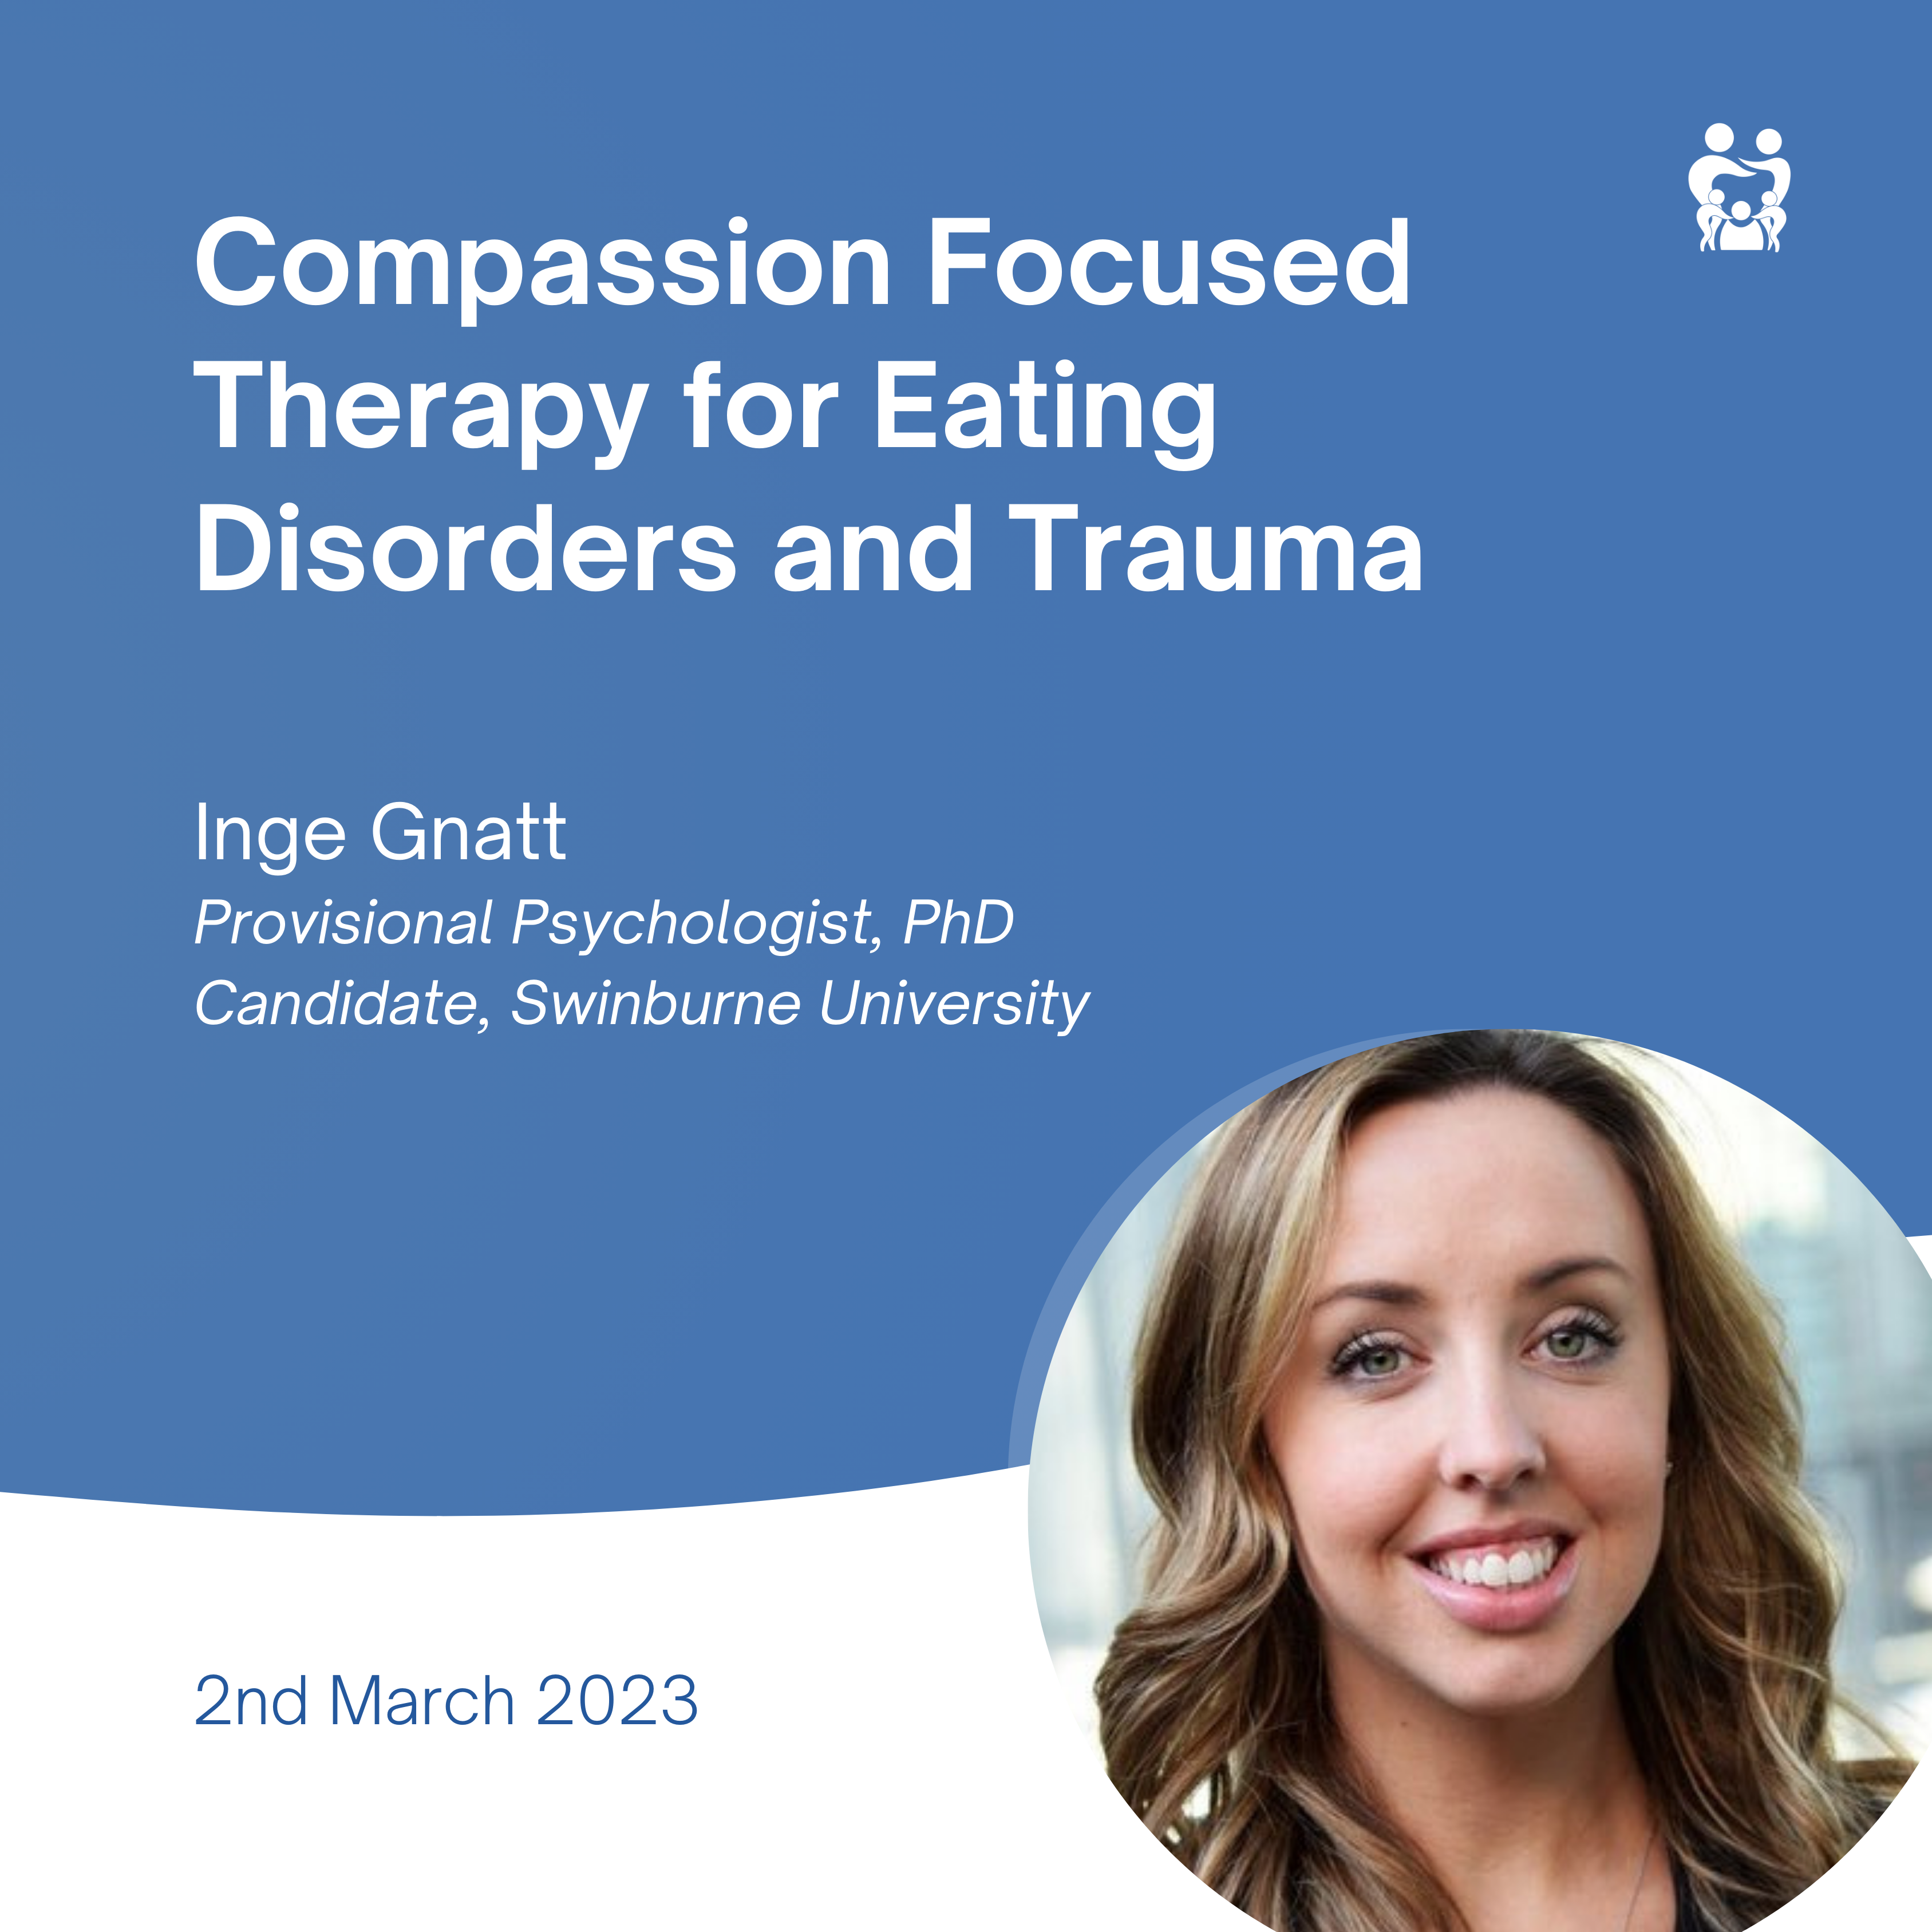 Compassion Focused Therapy for Eating Disorders and Trauma - Inge Gnatt 2 March 2023